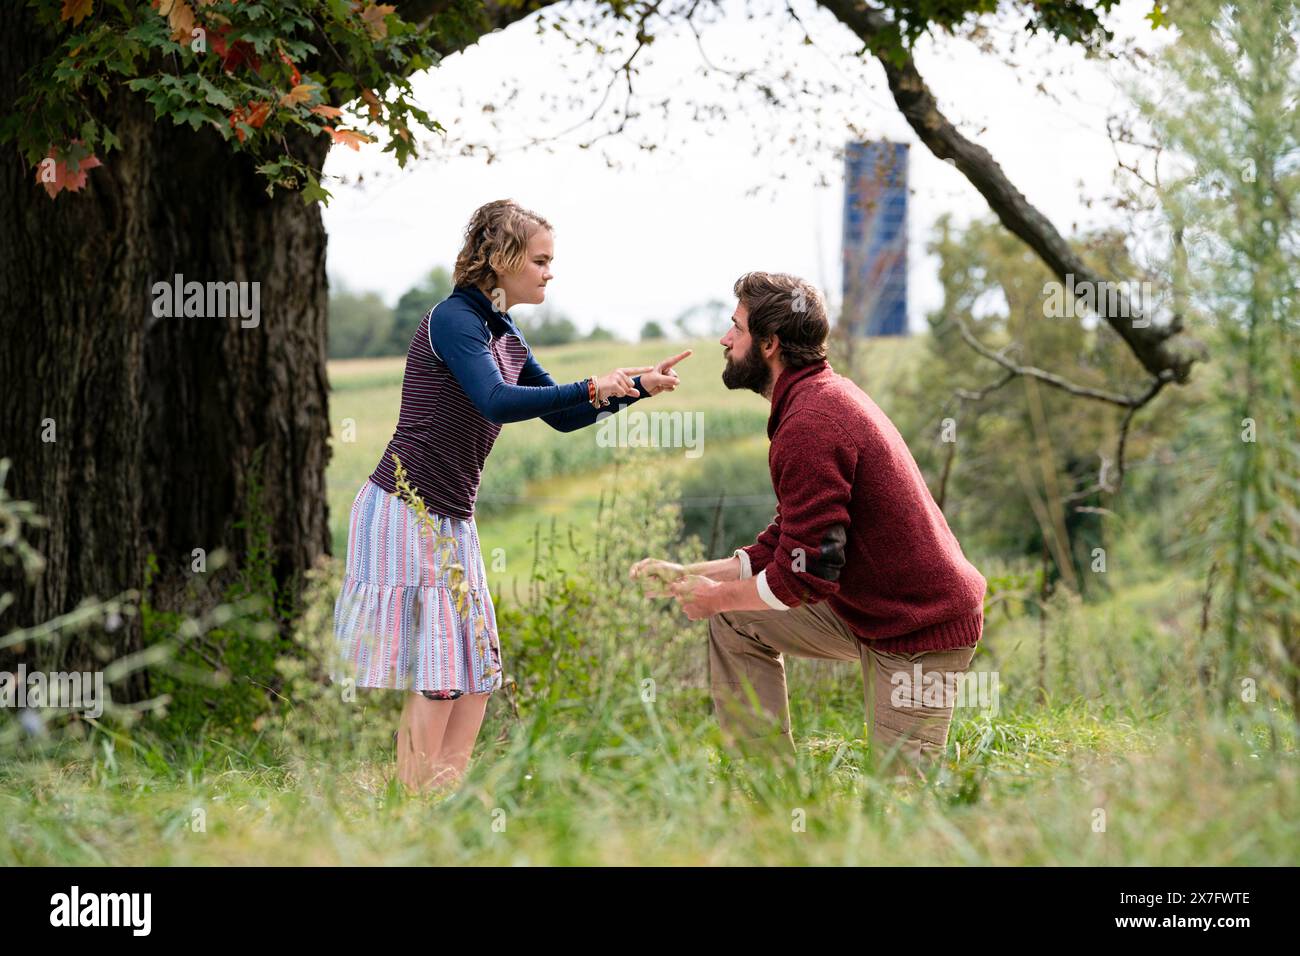 A Quiet Place: Part II (2020) directed by John Krasinski and starring Cillian Murphy, John Krasinski and Emily Blunt. Sequel following the Abbott family's journey and the discovery of new dangers. Publicity photograph ***EDITORIAL USE ONLY***. Credit: BFA / Jonny Cournoyer / Paramount Pictures Stock Photo